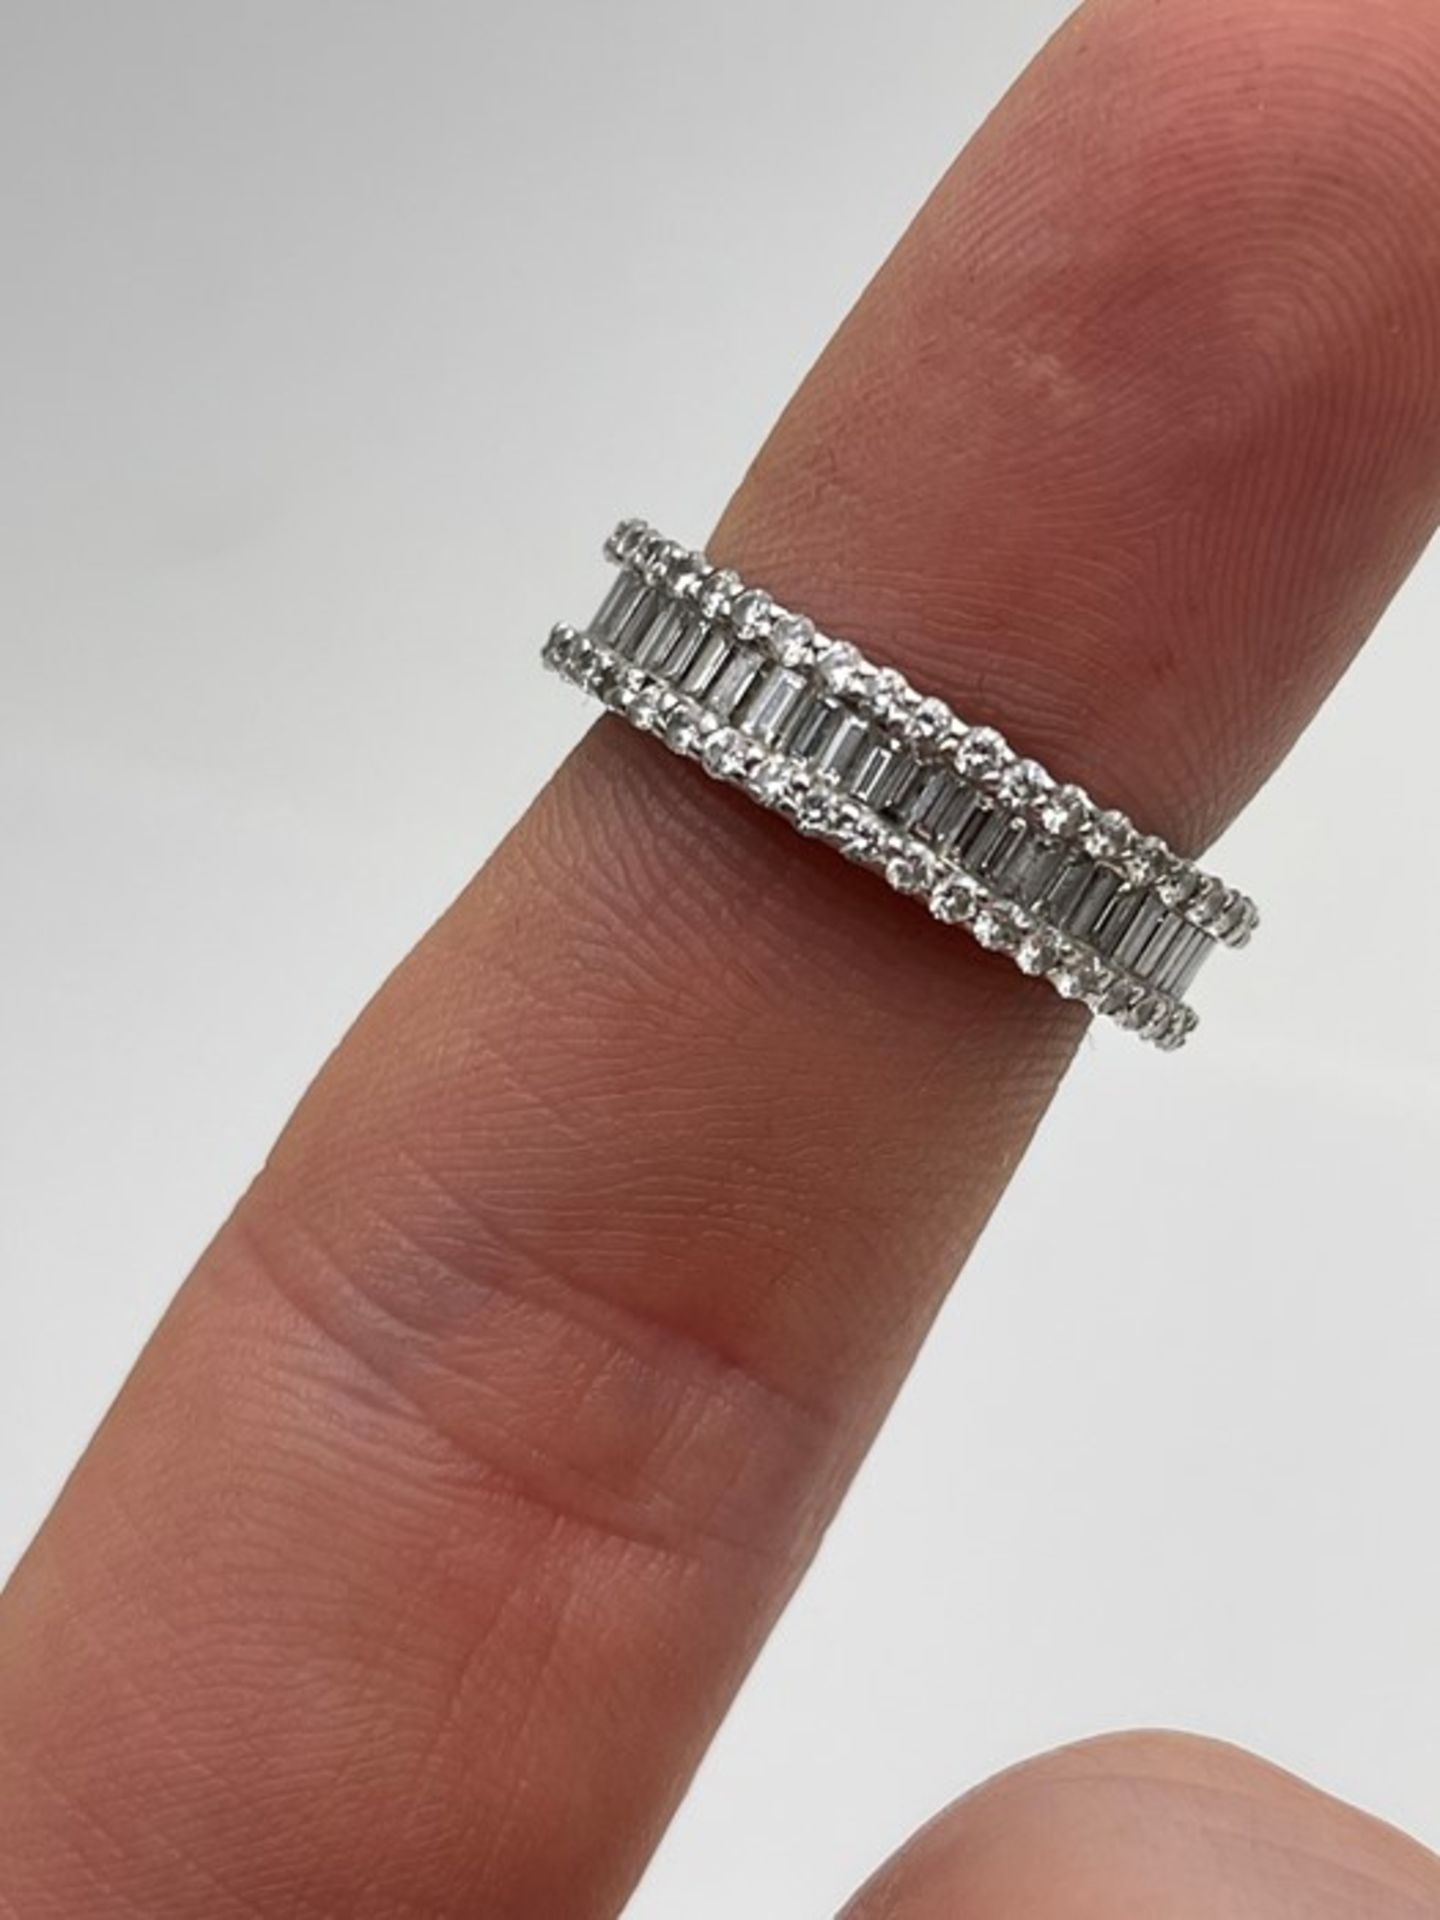 ***£7900.00*** 18CT WHITE GOLD DIAMOND FULL ETERNITY RING, SET WITH FIFTY SEVEN BAGUETTE CUT - Image 2 of 5